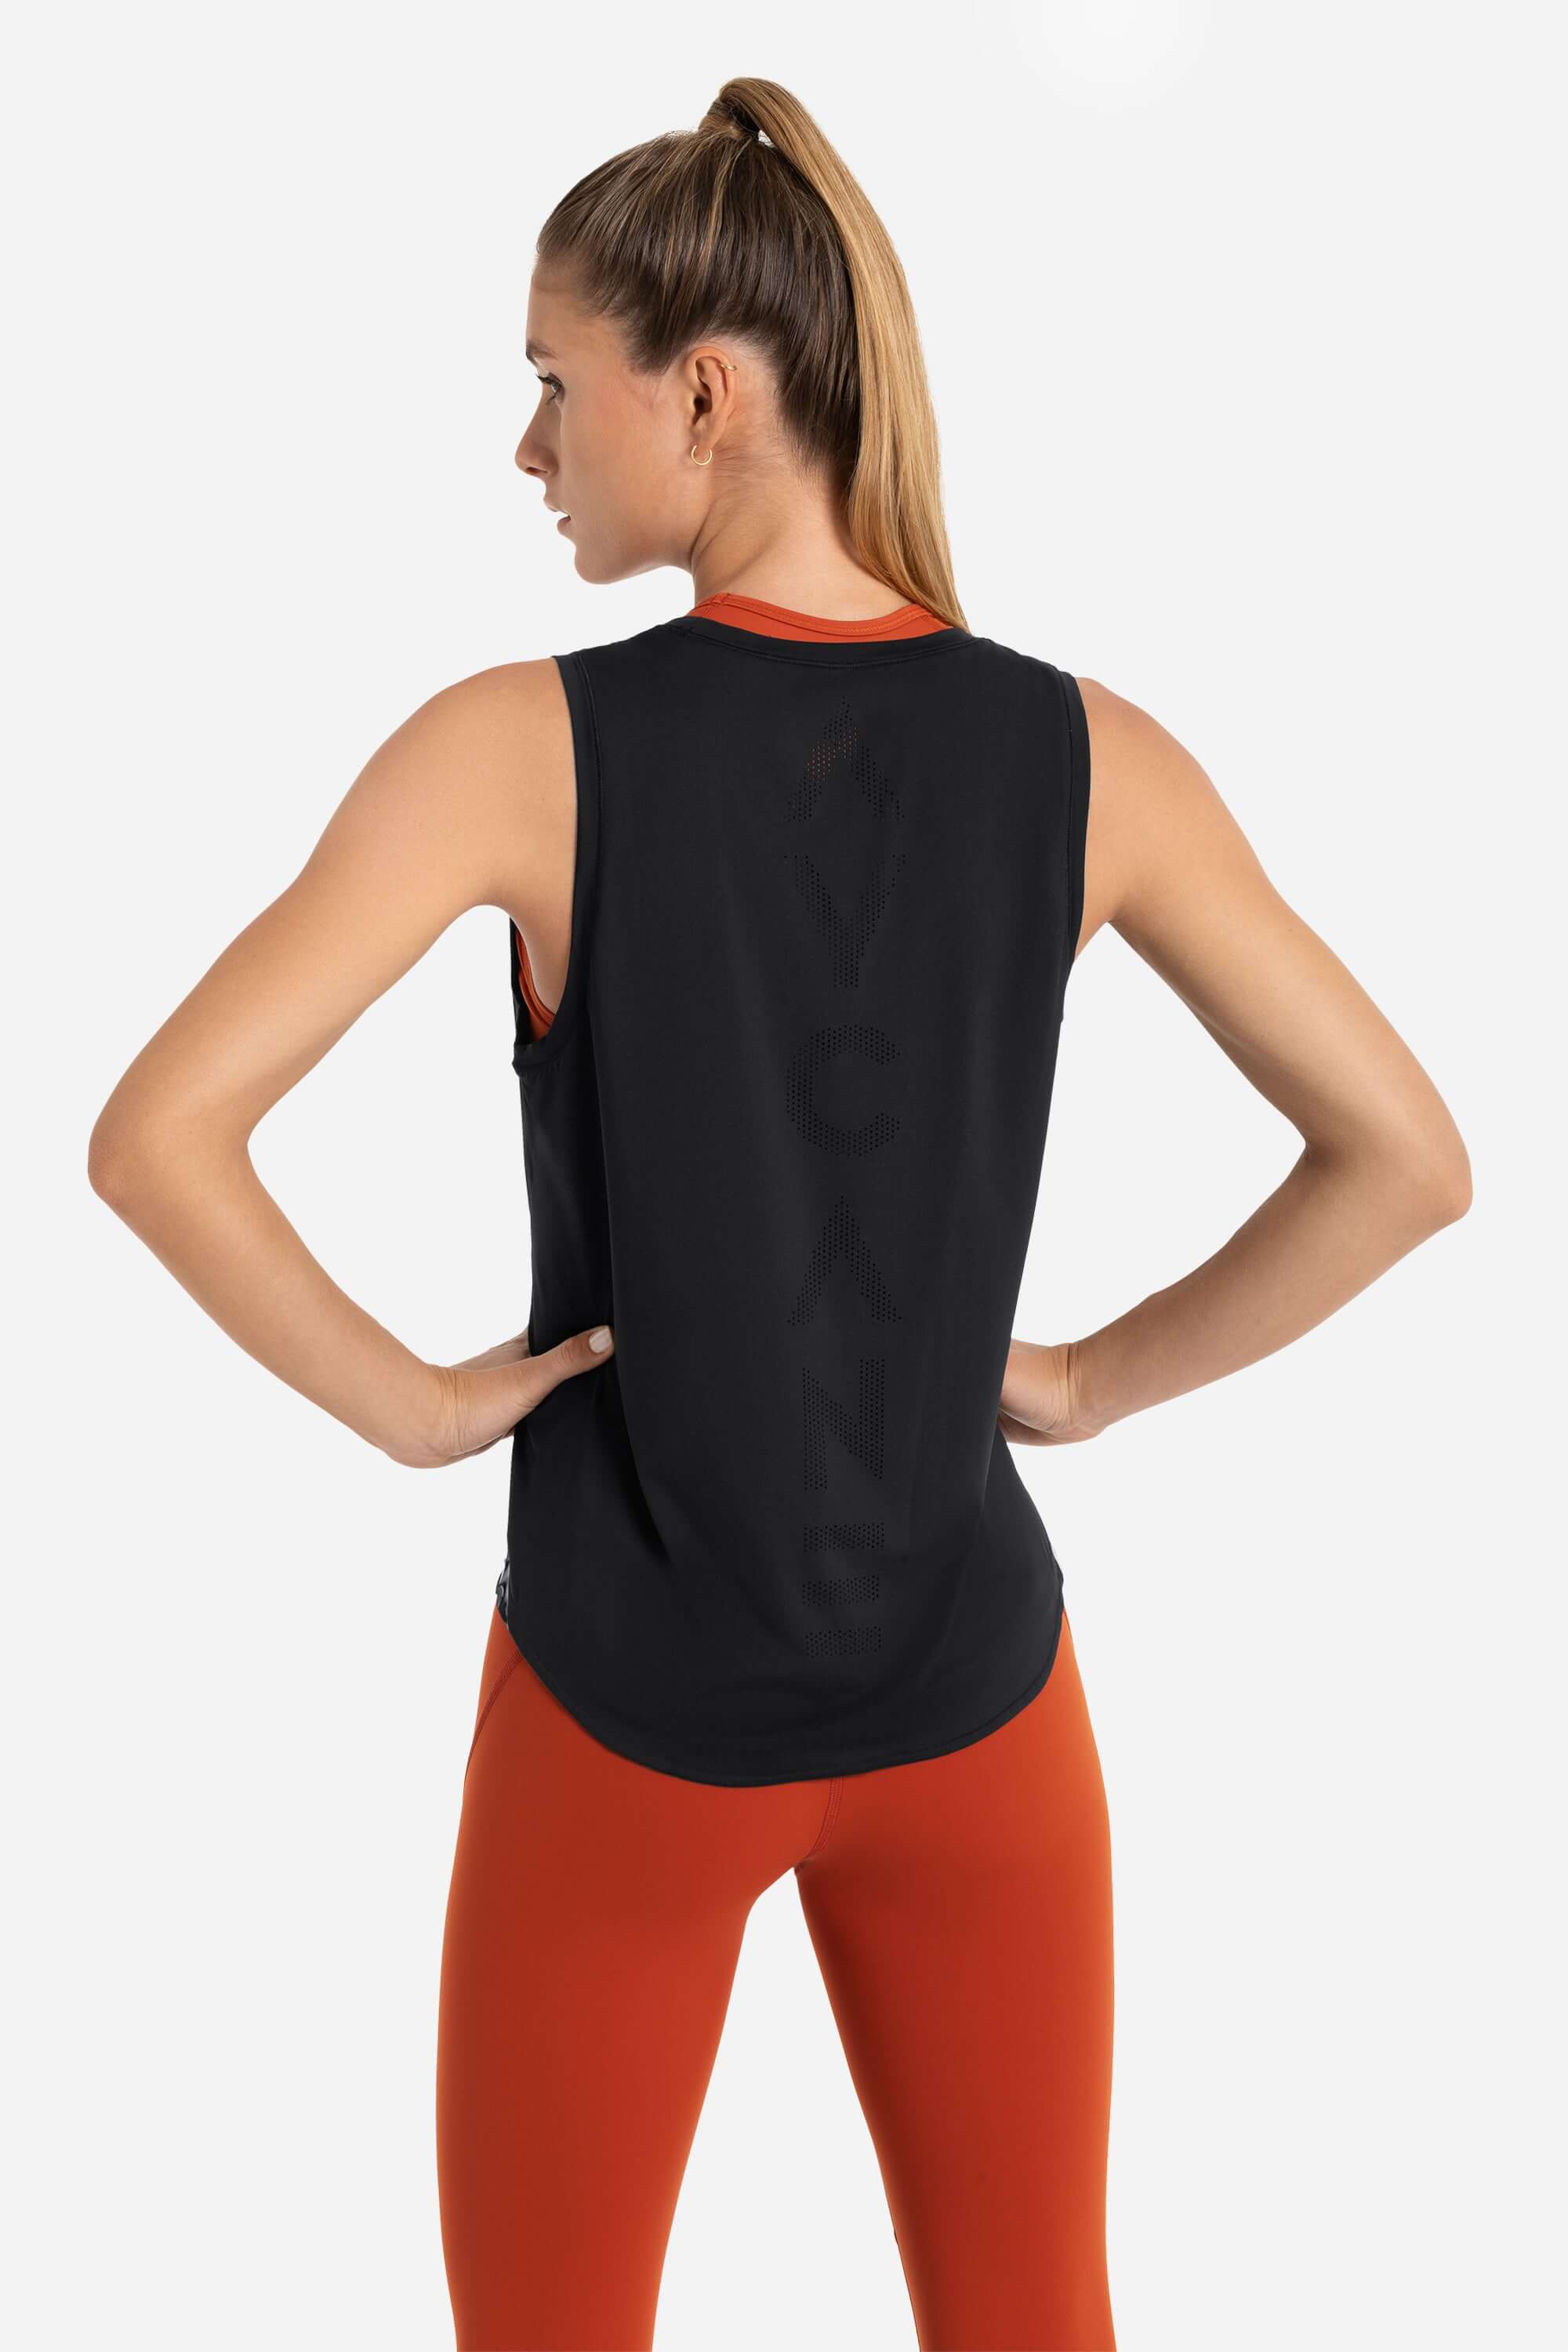 Women training tank top in black with laser cut holes in the back